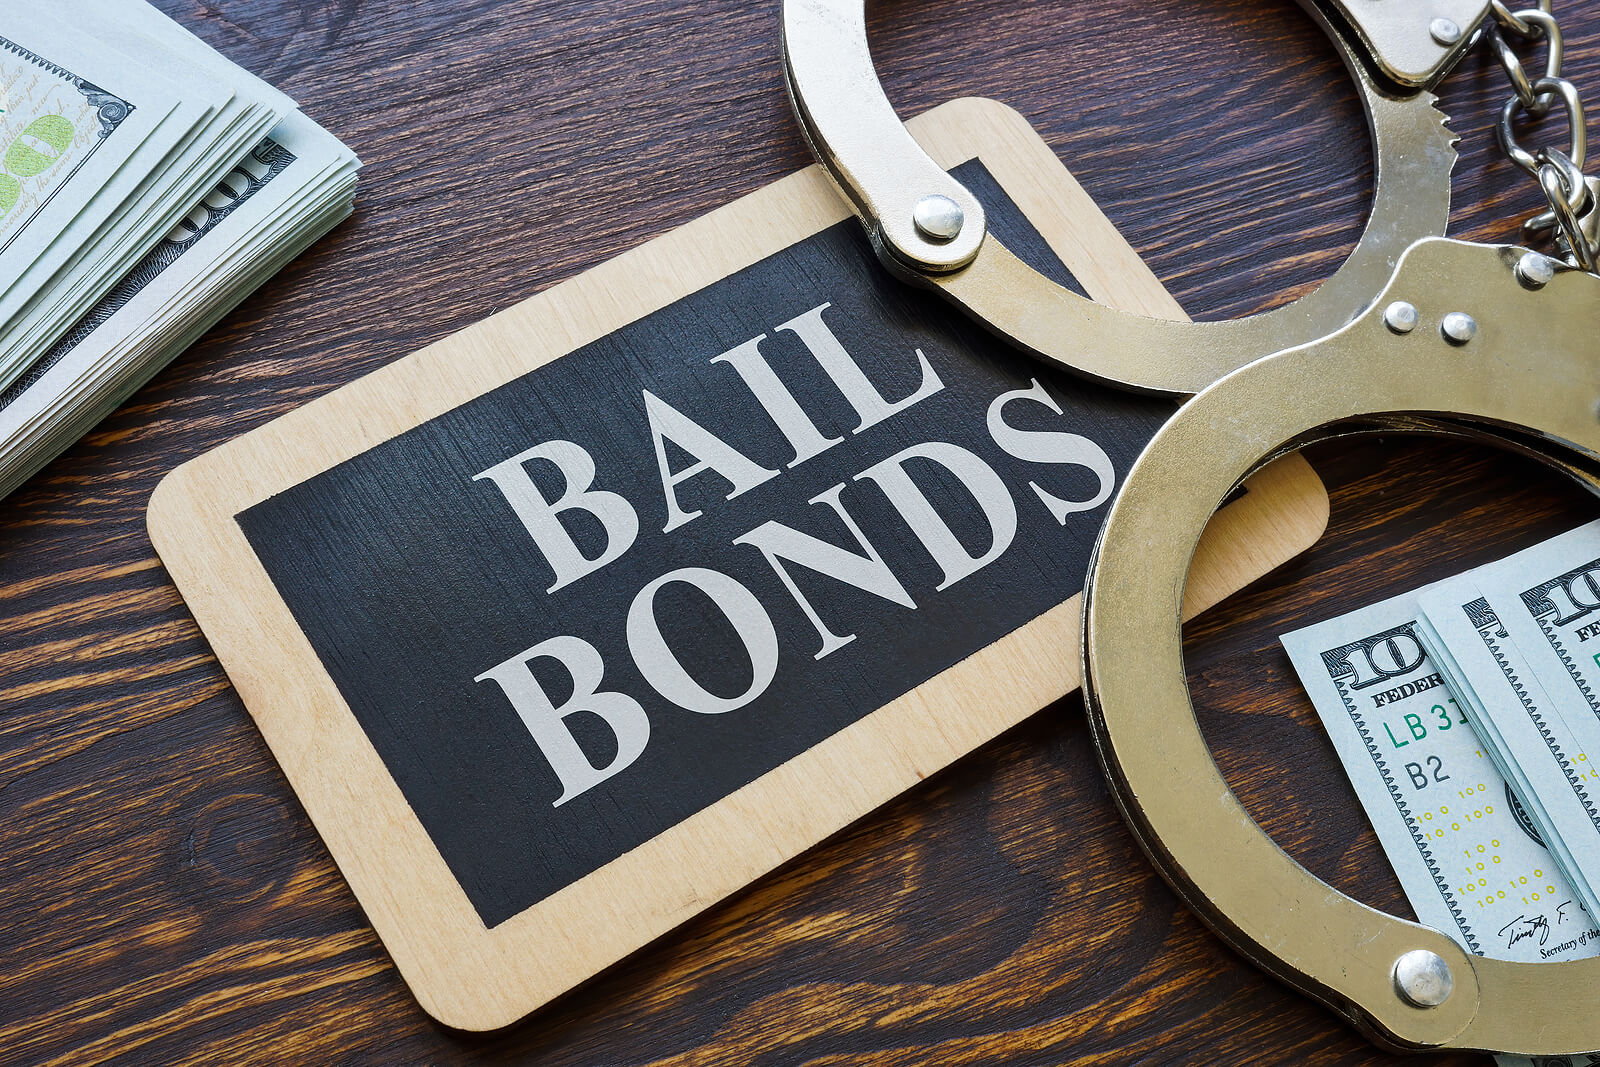 Why Bail Bonds are the Most Affordable Option for Getting Out of Jail